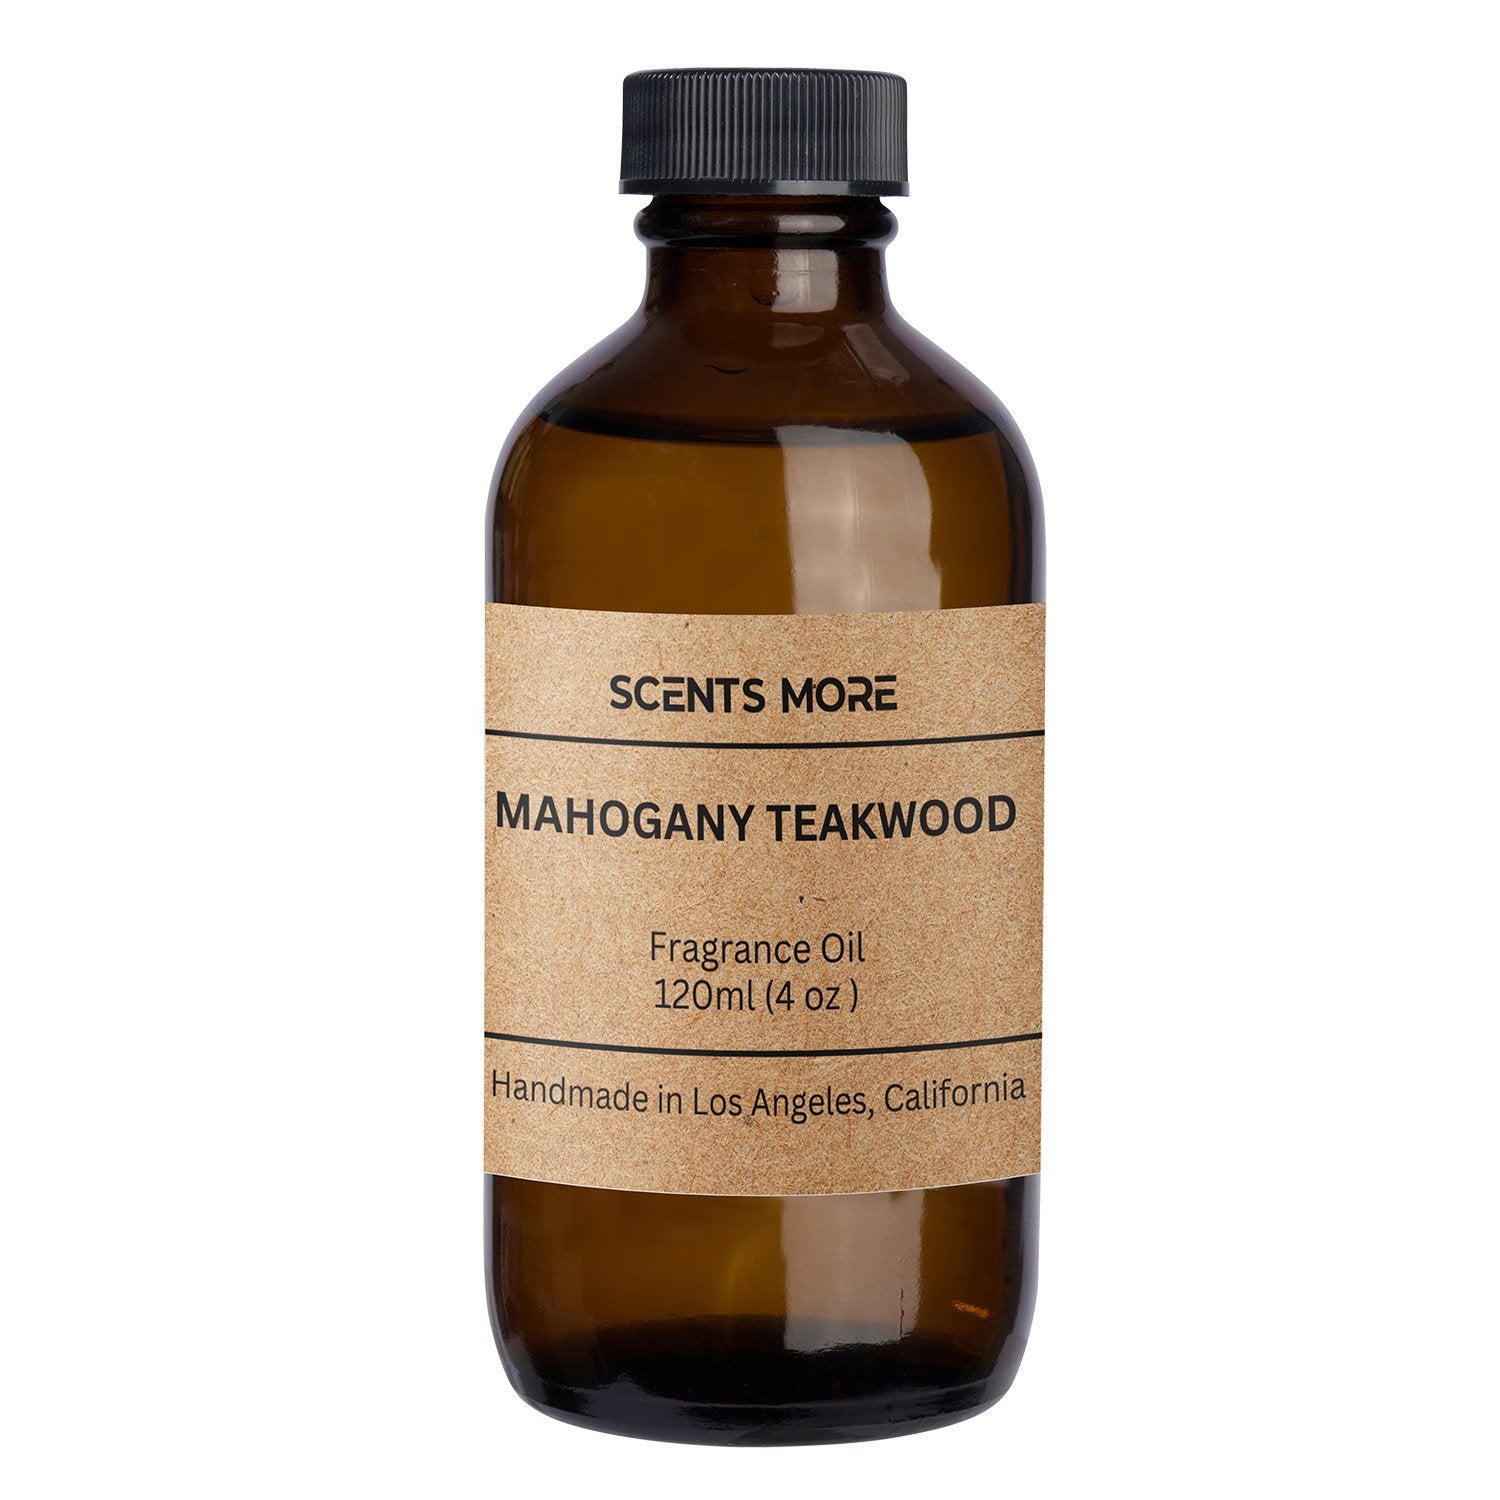 Mahogany Teakwood Fragrance Oil for Soap & Candle Making - Scents More